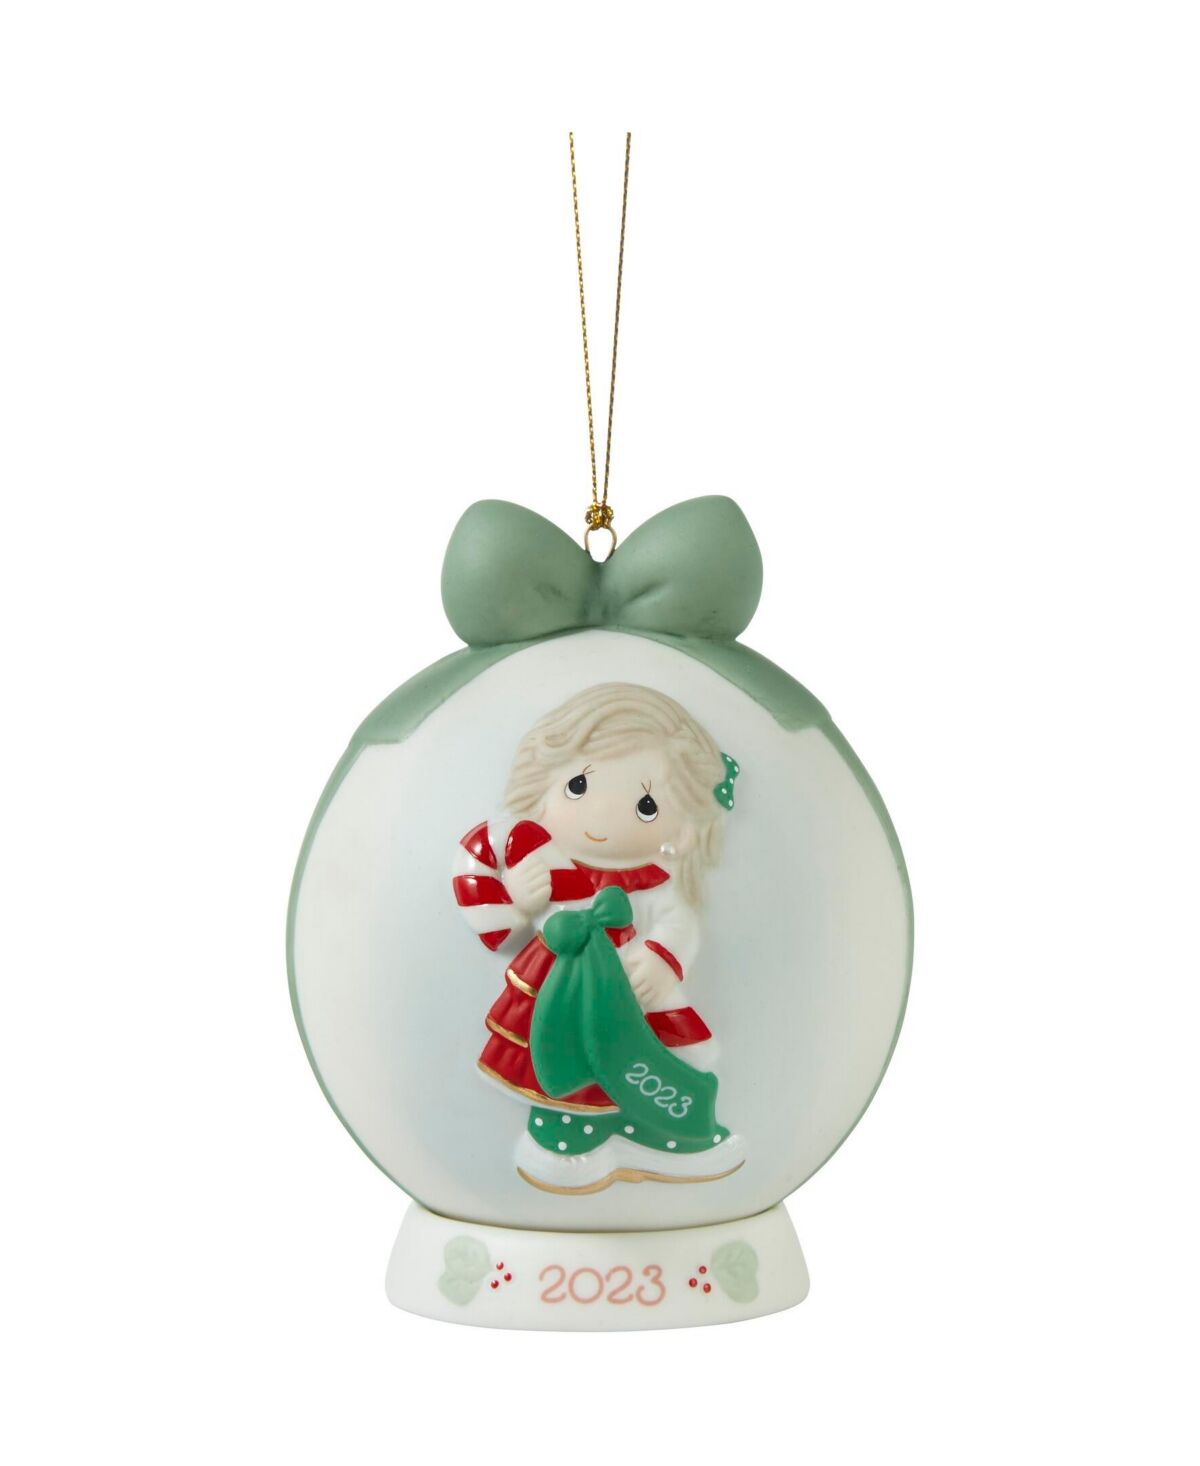 Precious Moments Sweet Christmas Wishes 2023 Dated Ball Bisque Porcelain Ornament - Multicolored